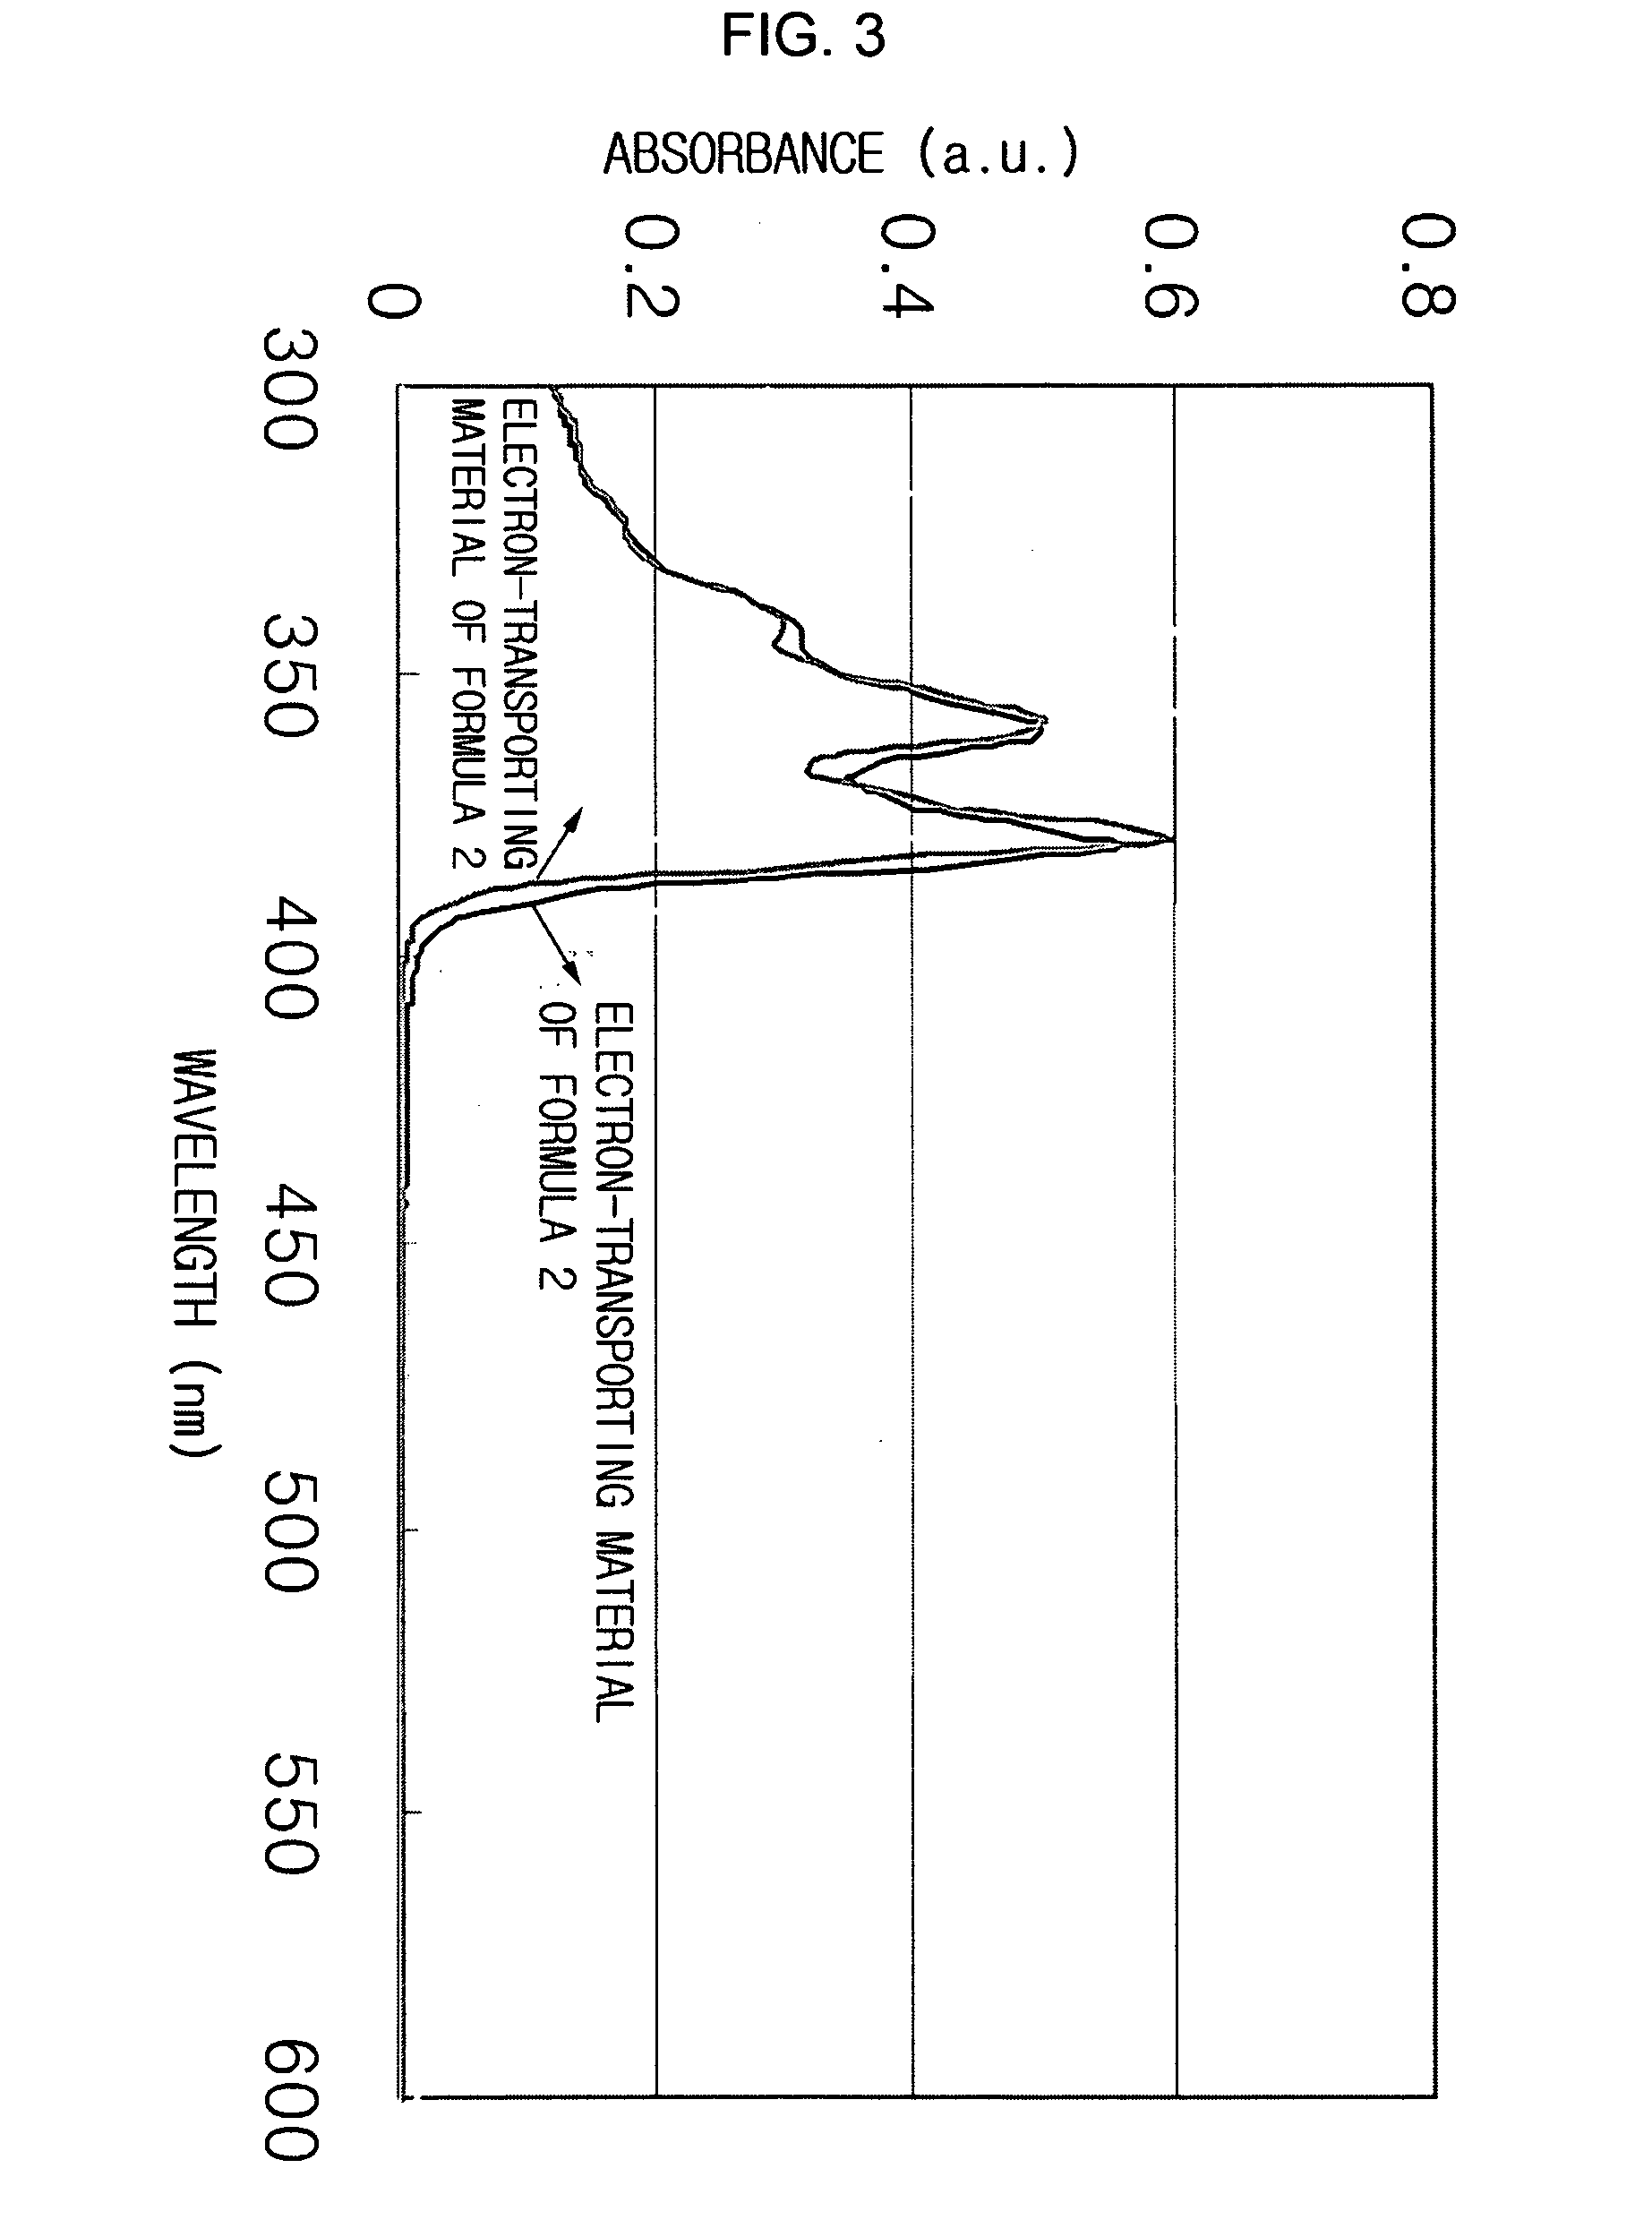 Organic photoreceptor for short wavelengths and electrophotographic imaging forming apparatus employing the organic photoreceptor